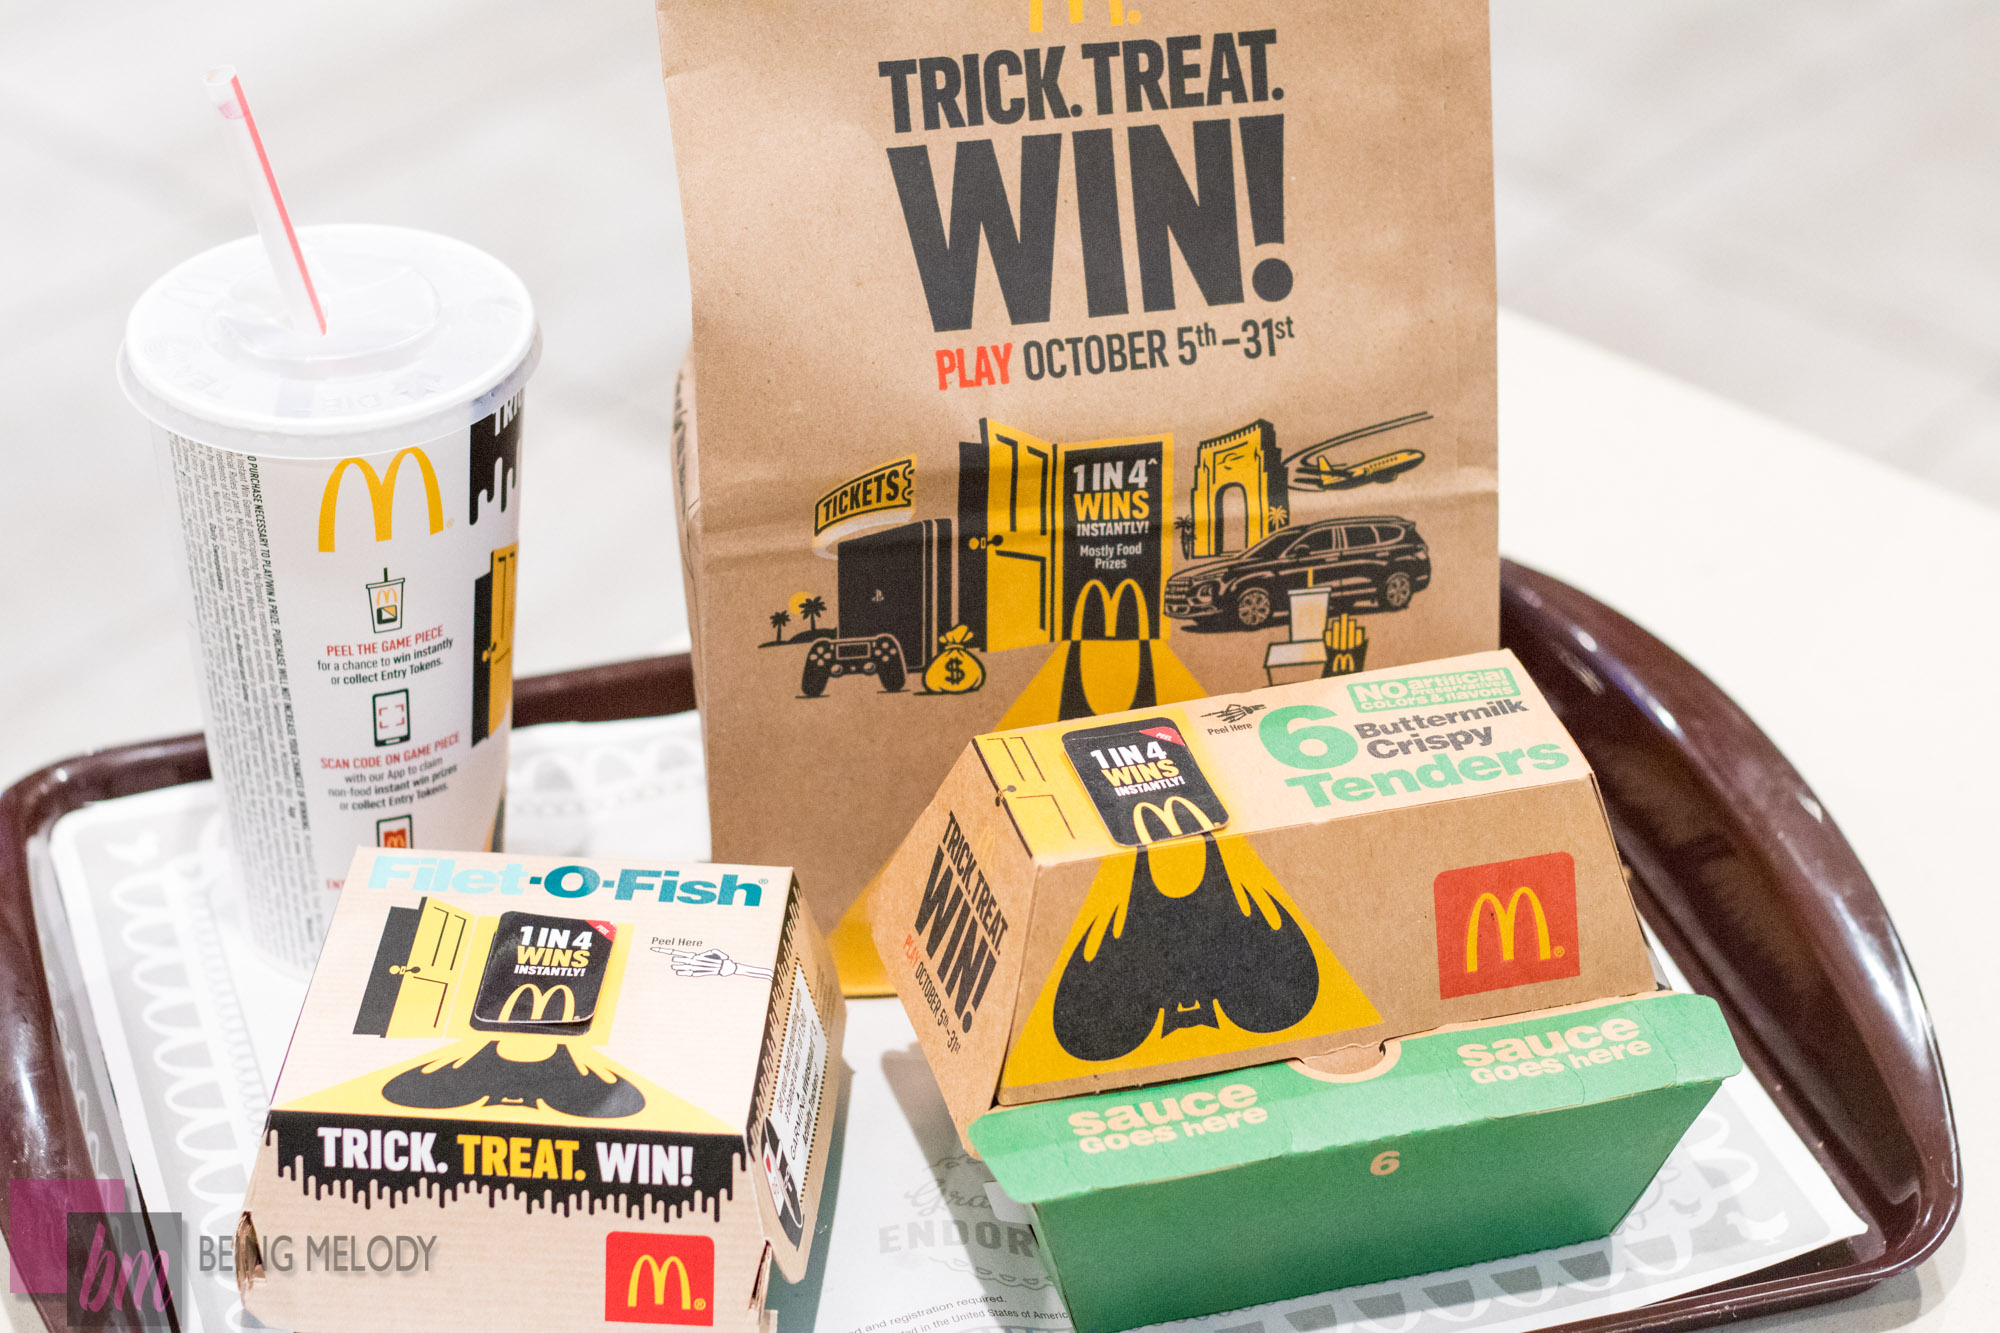 McDonalds Trick Treat and Win Game www.beingmelody.com